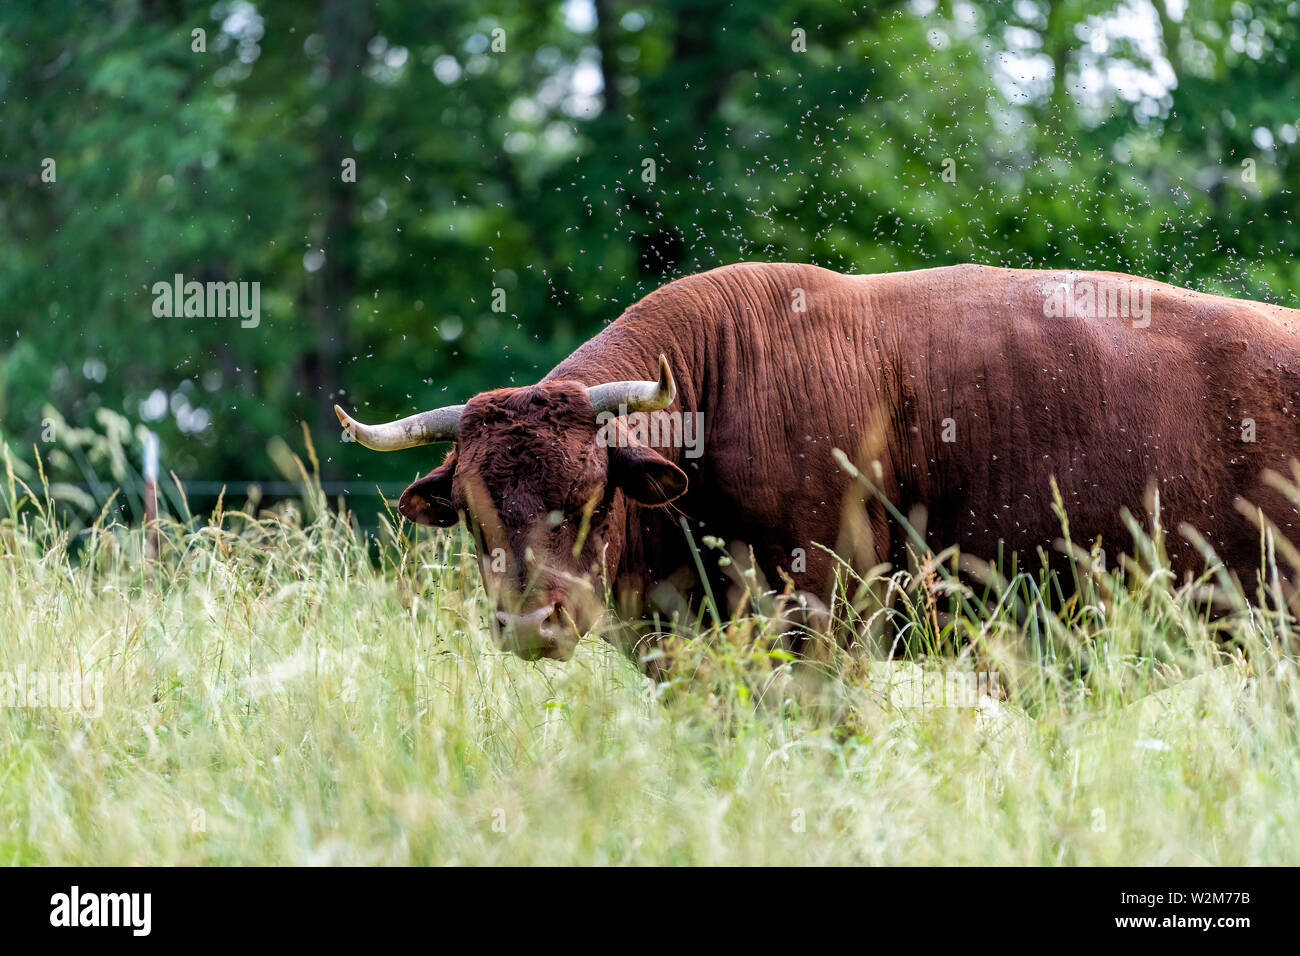 One bull cow in farm field grazing on grass and many flies around it and bokeh background Stock Photo